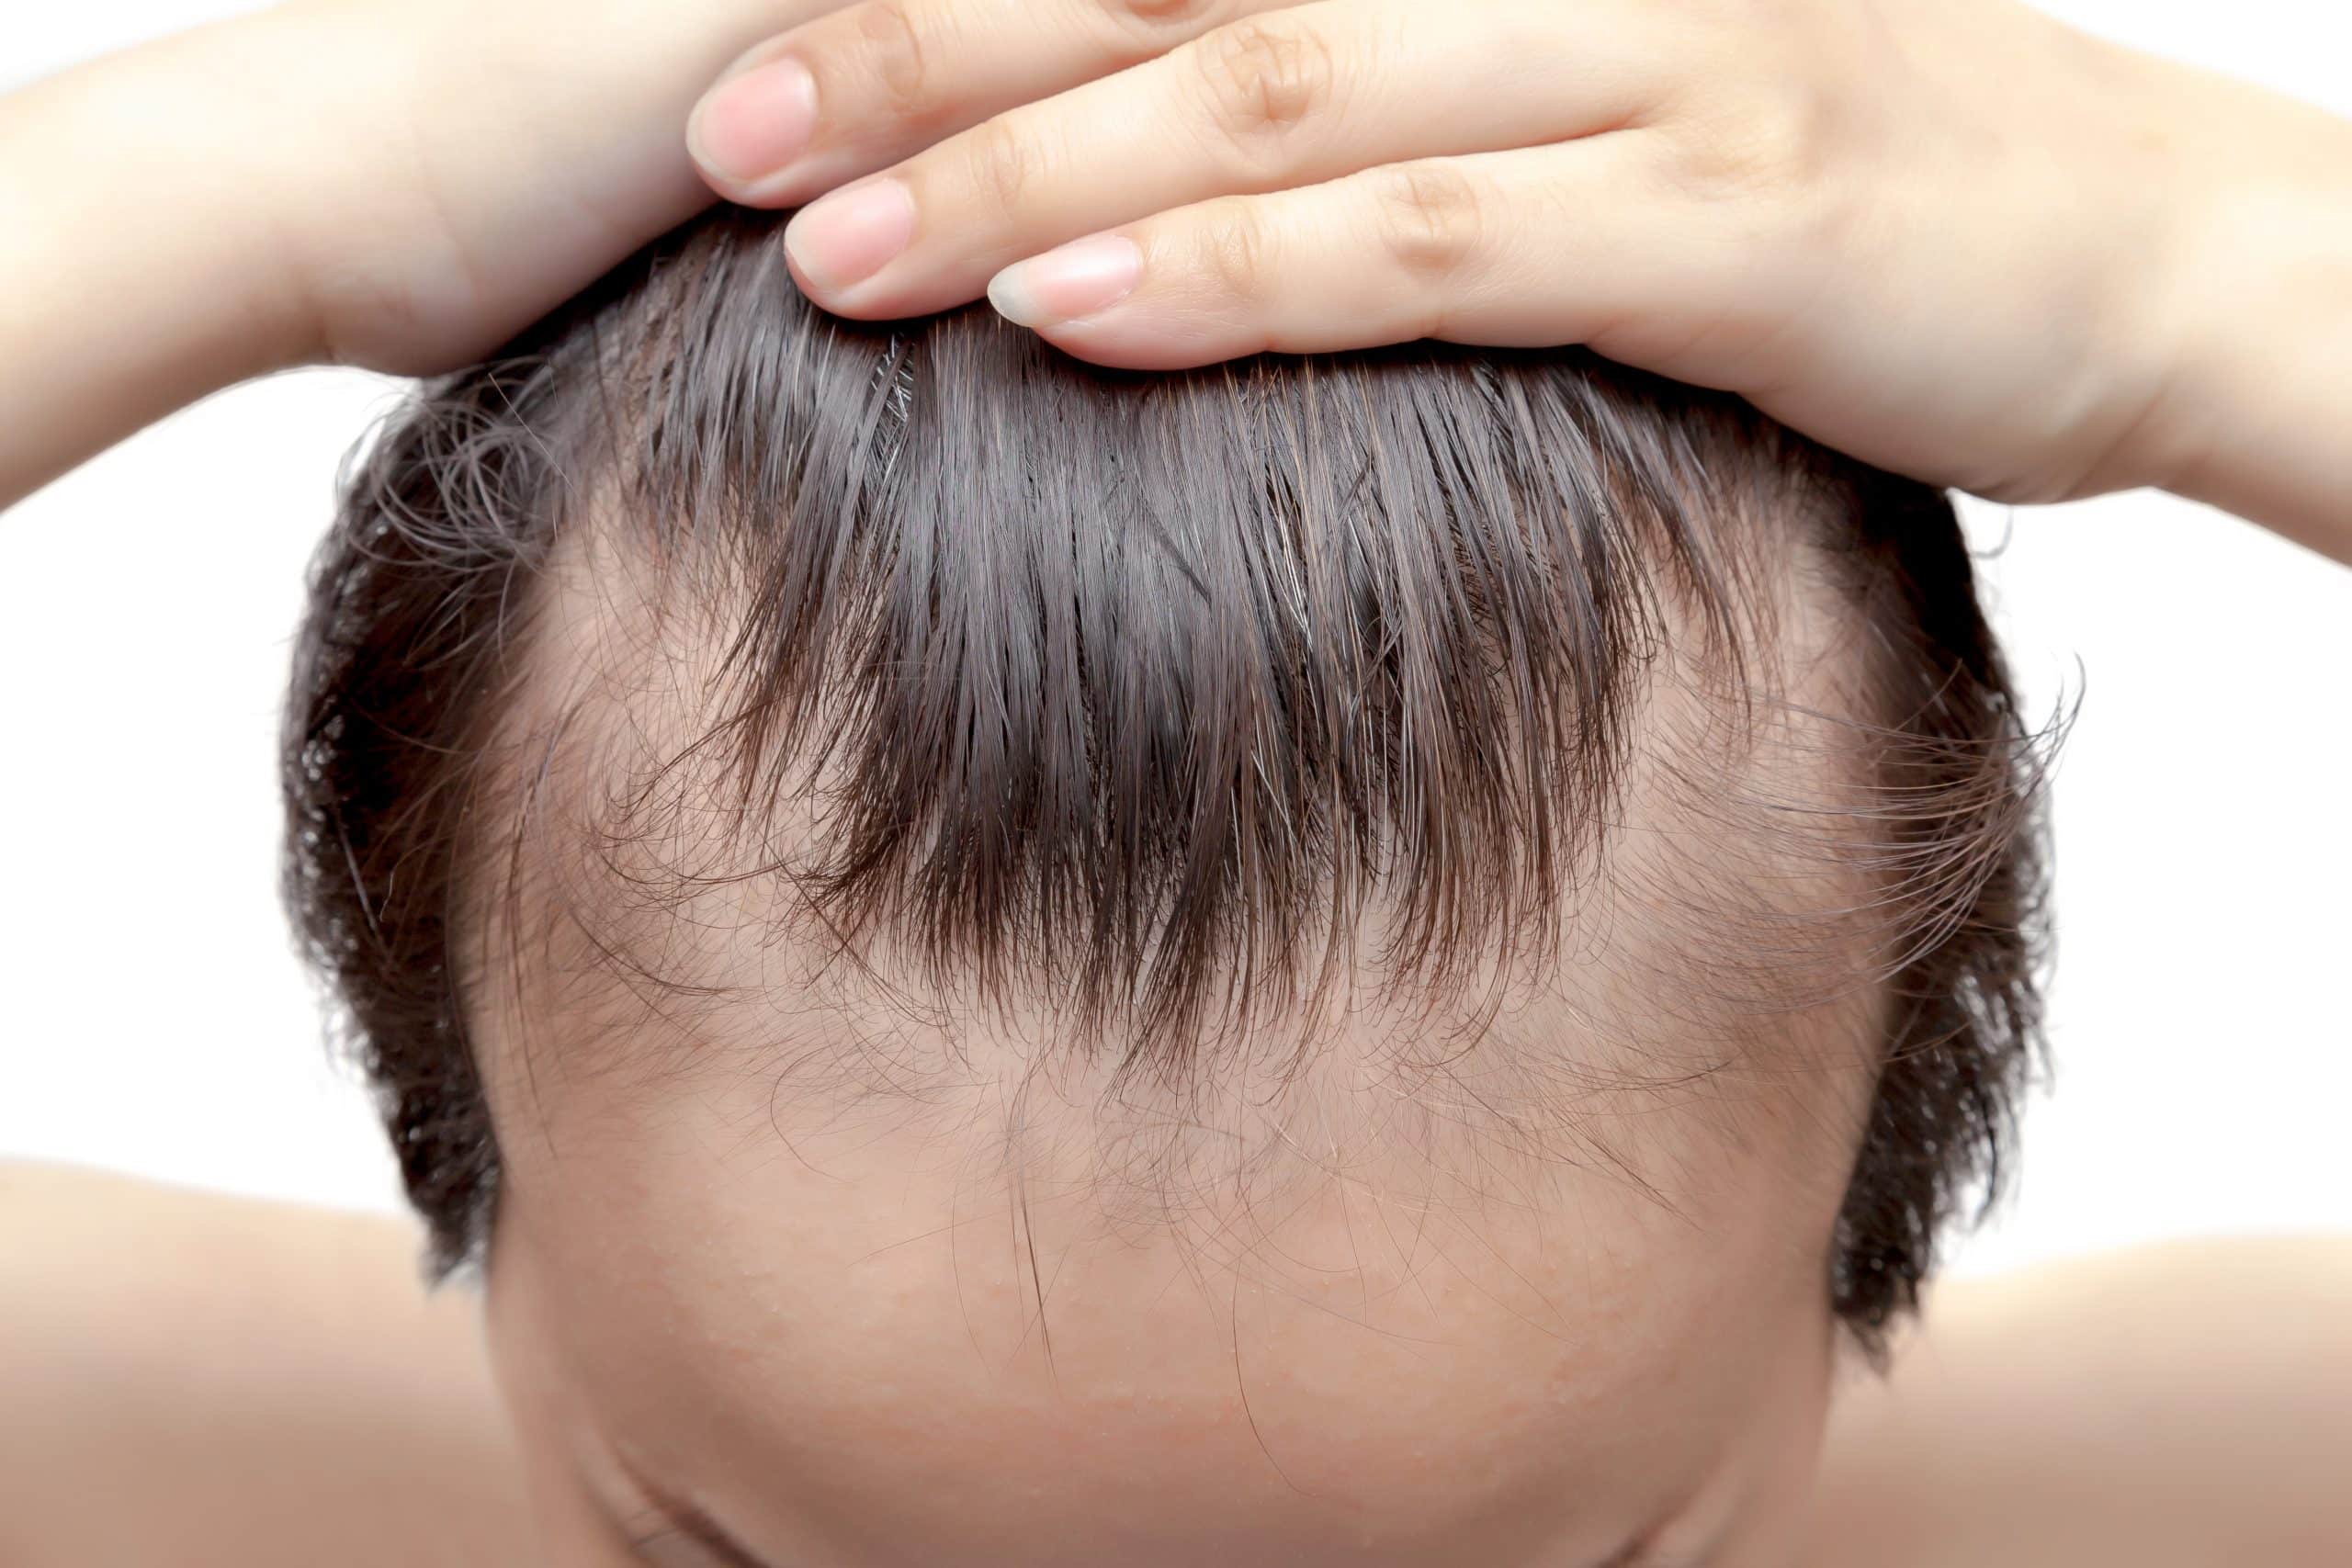 Is there a right age to start hair transplant?